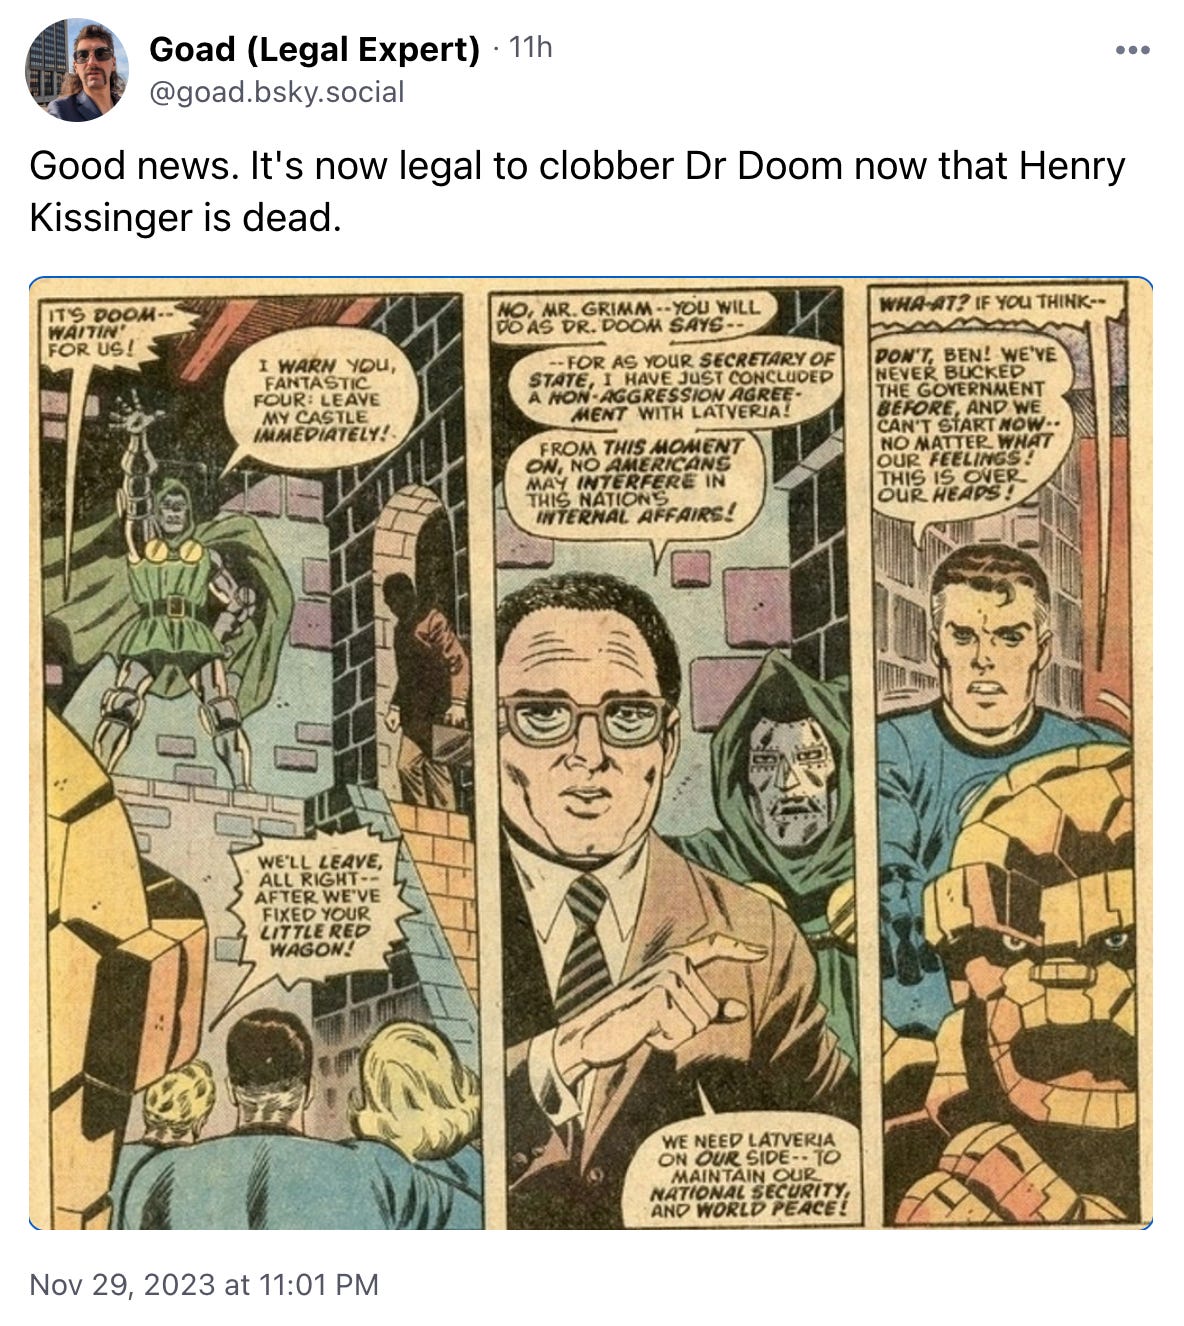 Good news. It's now legal to clobber Dr Doom now that Henry Kissinger is dead.